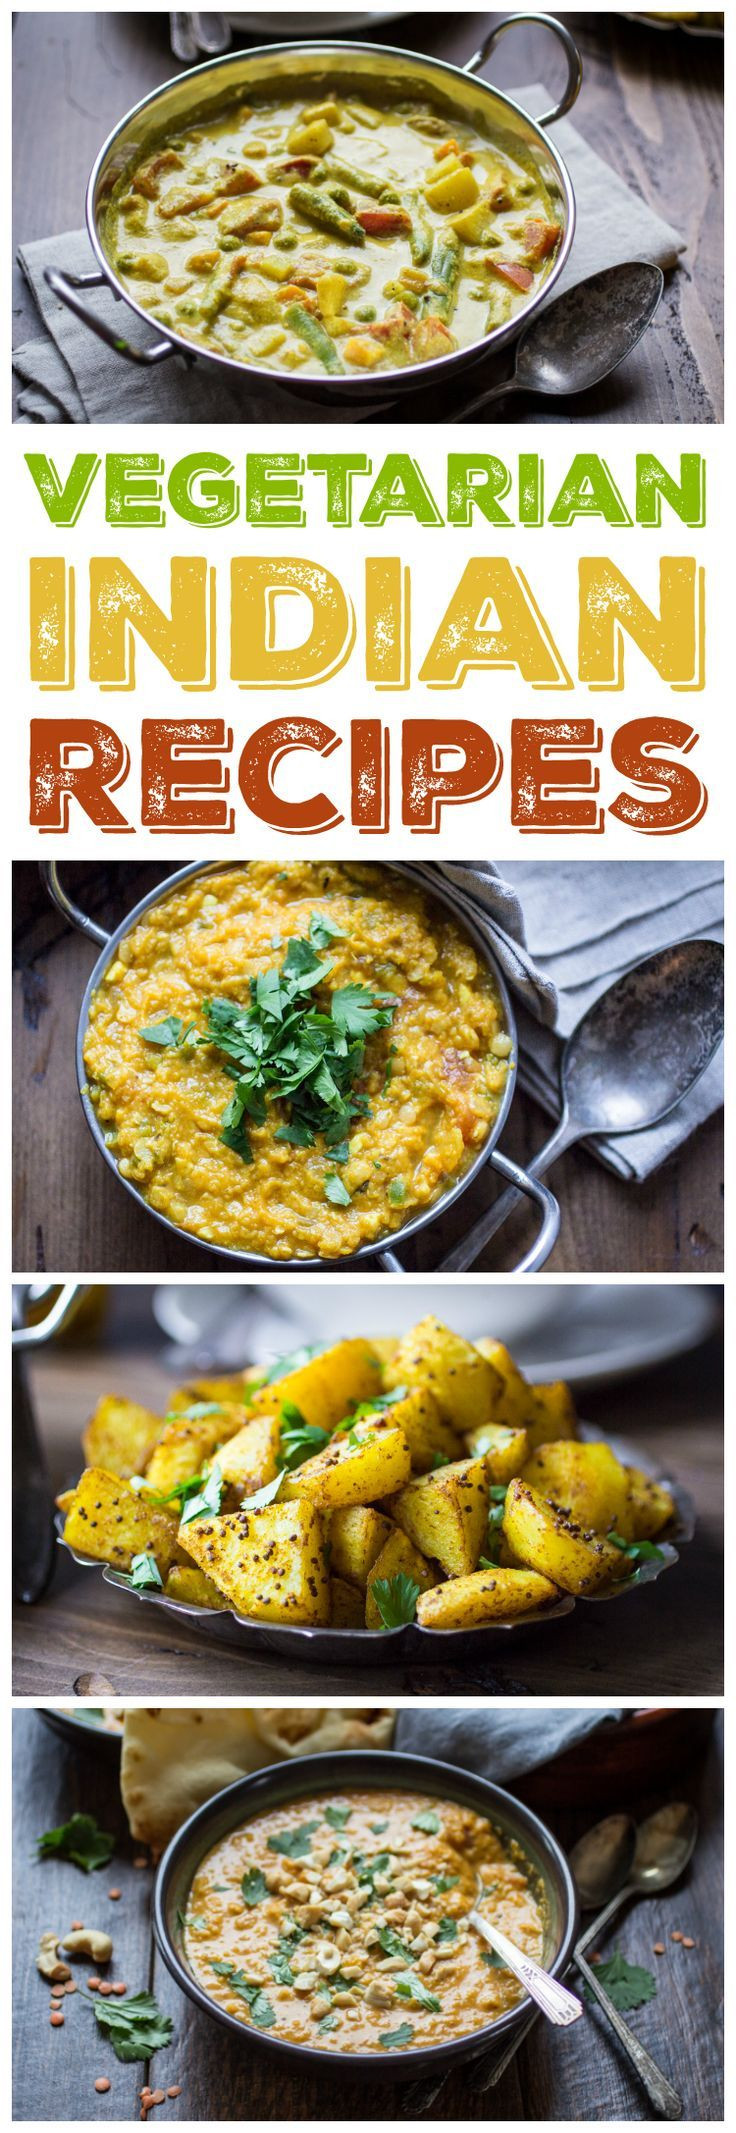 Easy Indian Dinner Recipes For Family
 These are my TOP 10 ve arian Indian recipes perfect